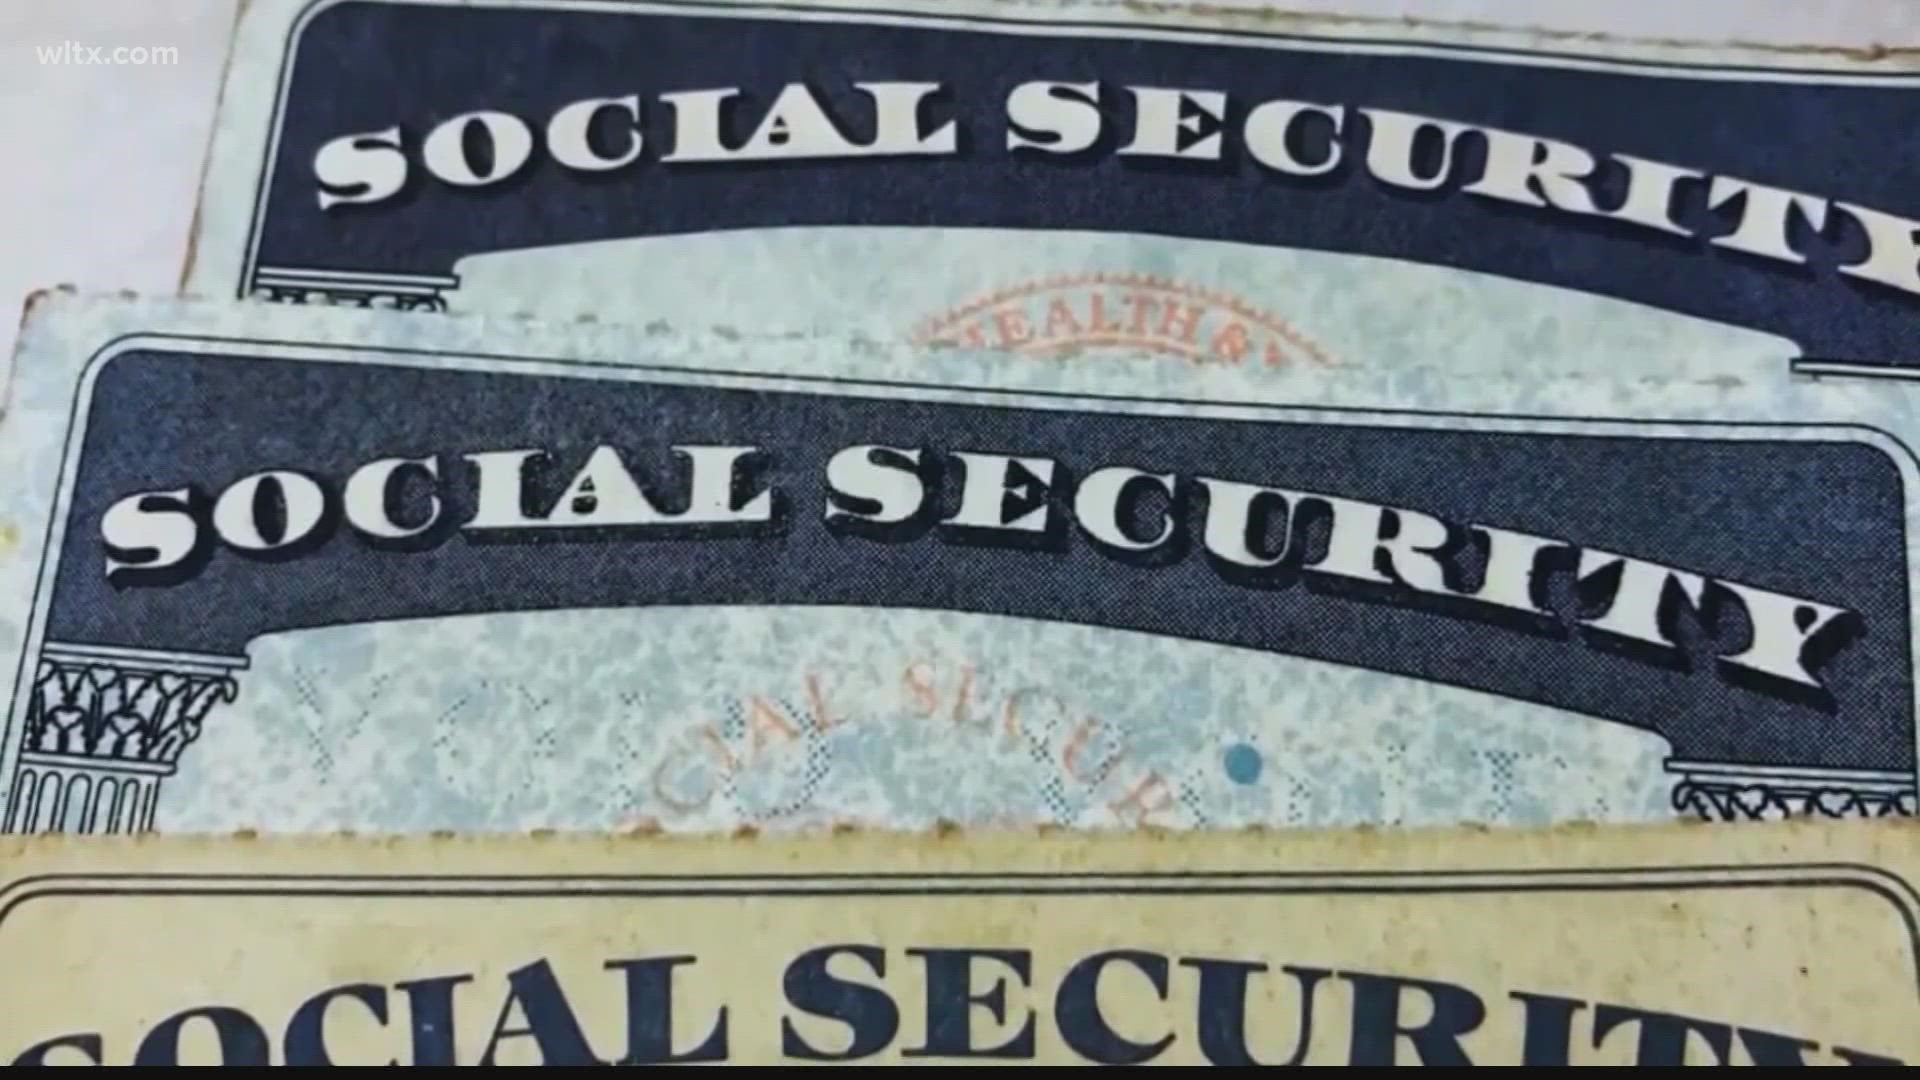 Despite an increase in social security benefits, some recipients say the higher cost of everyday items is outpacing the extra dollars.